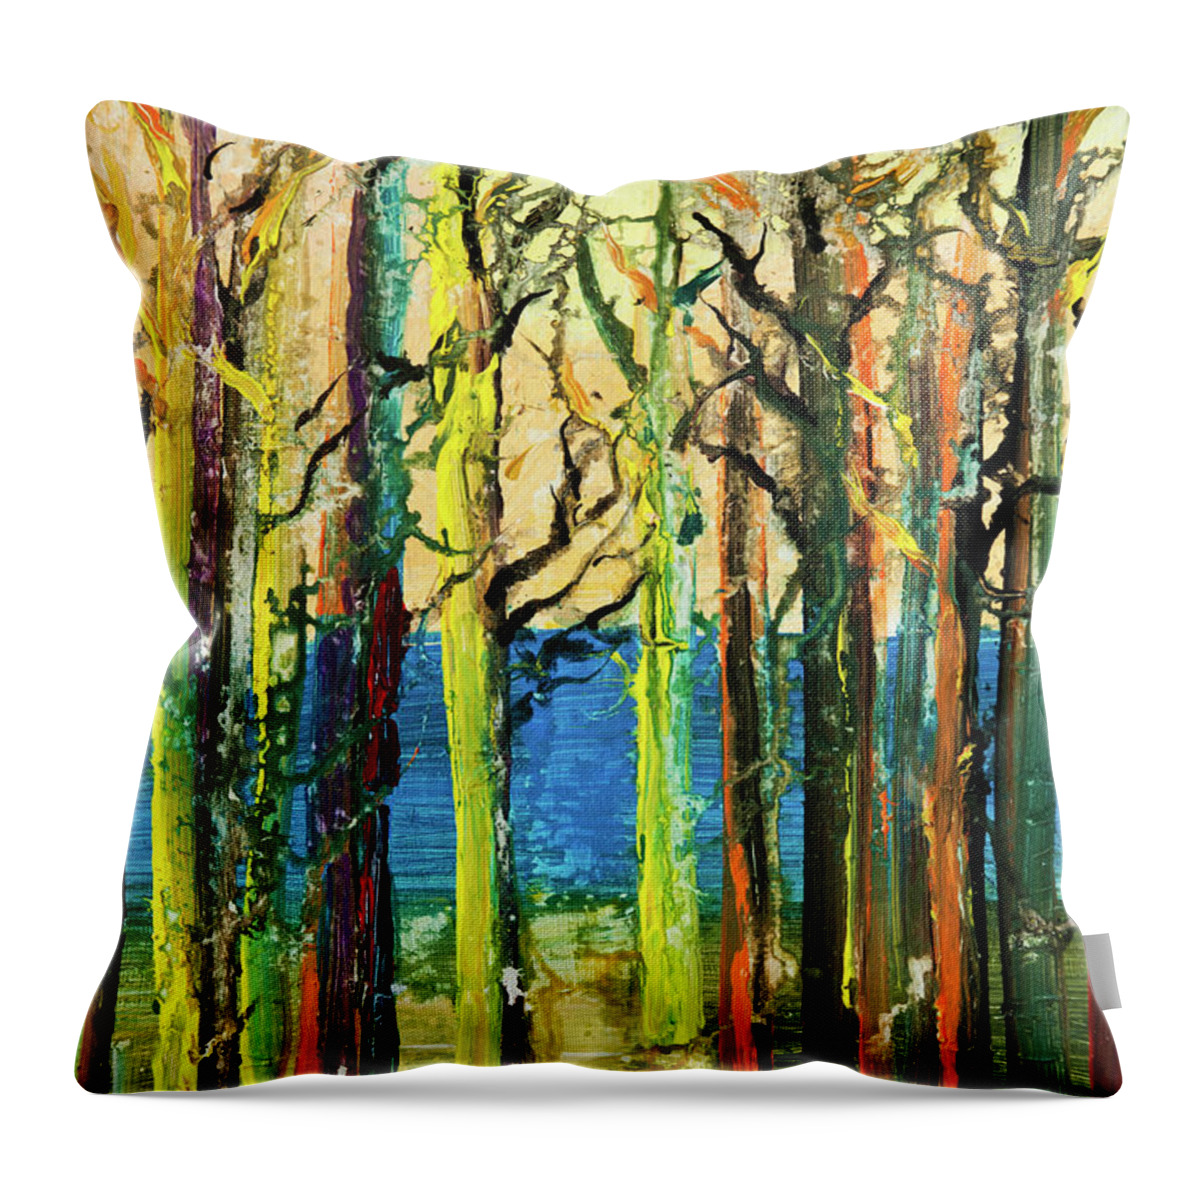 Water's Edge Throw Pillow featuring the digital art Abstract Forest by Balticboy